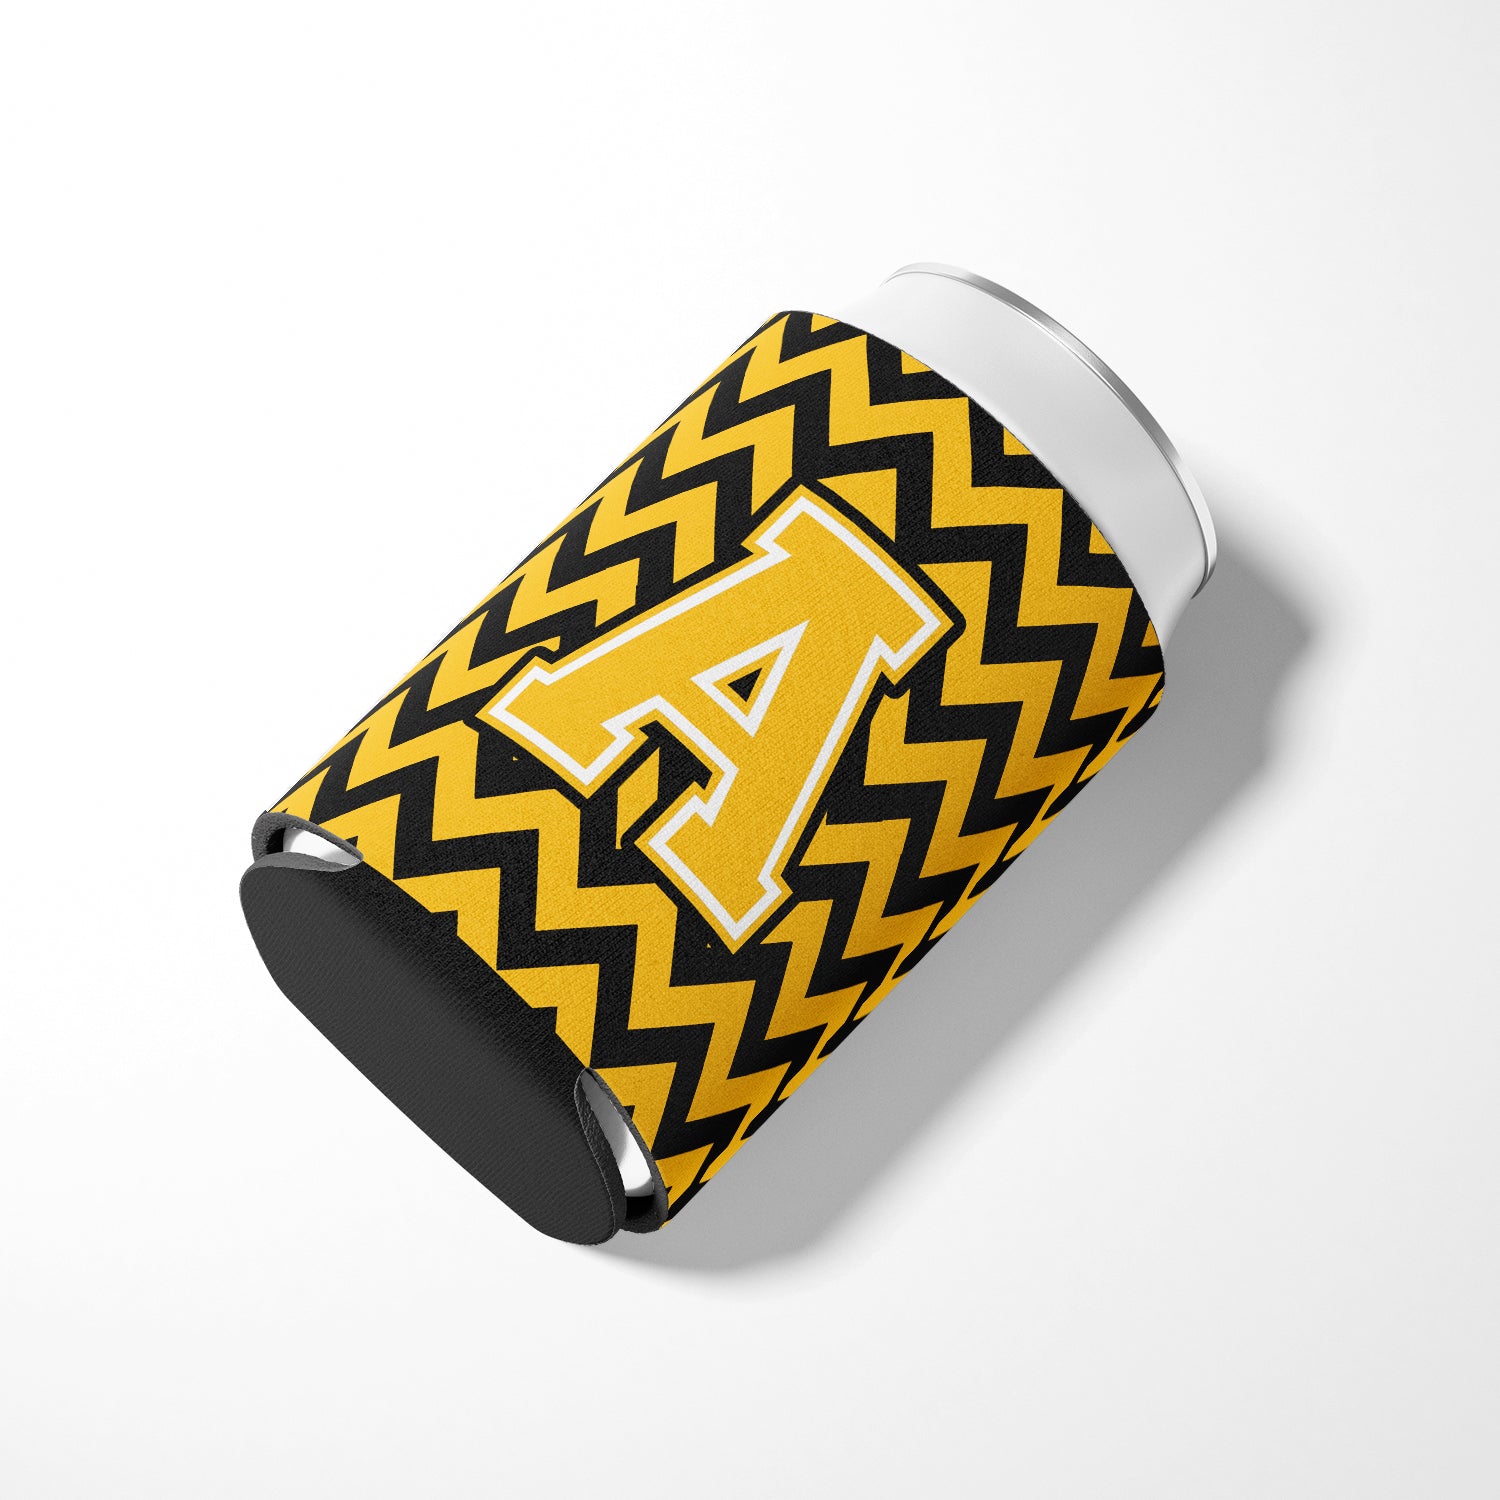 Letter A Chevron Black and Gold Can or Bottle Hugger CJ1053-ACC.